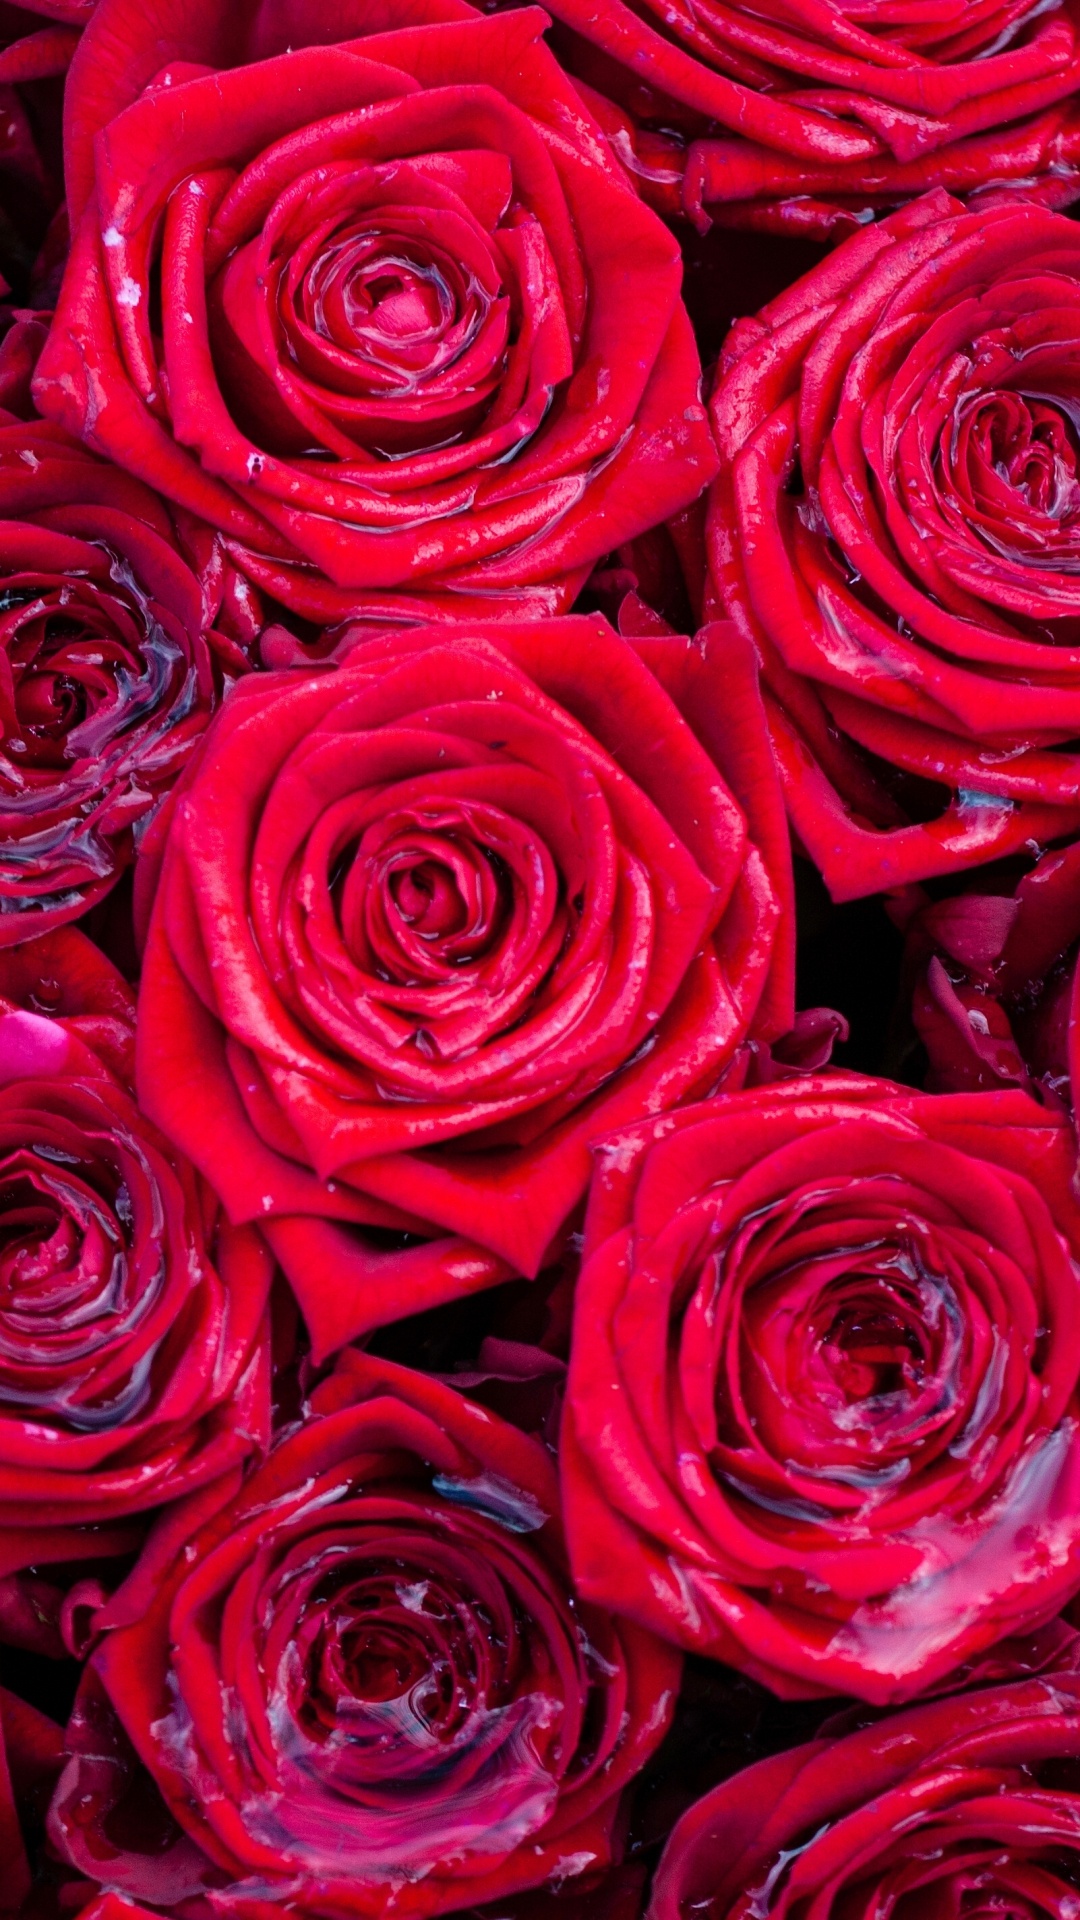 Red Roses in Close up Photography. Wallpaper in 1080x1920 Resolution